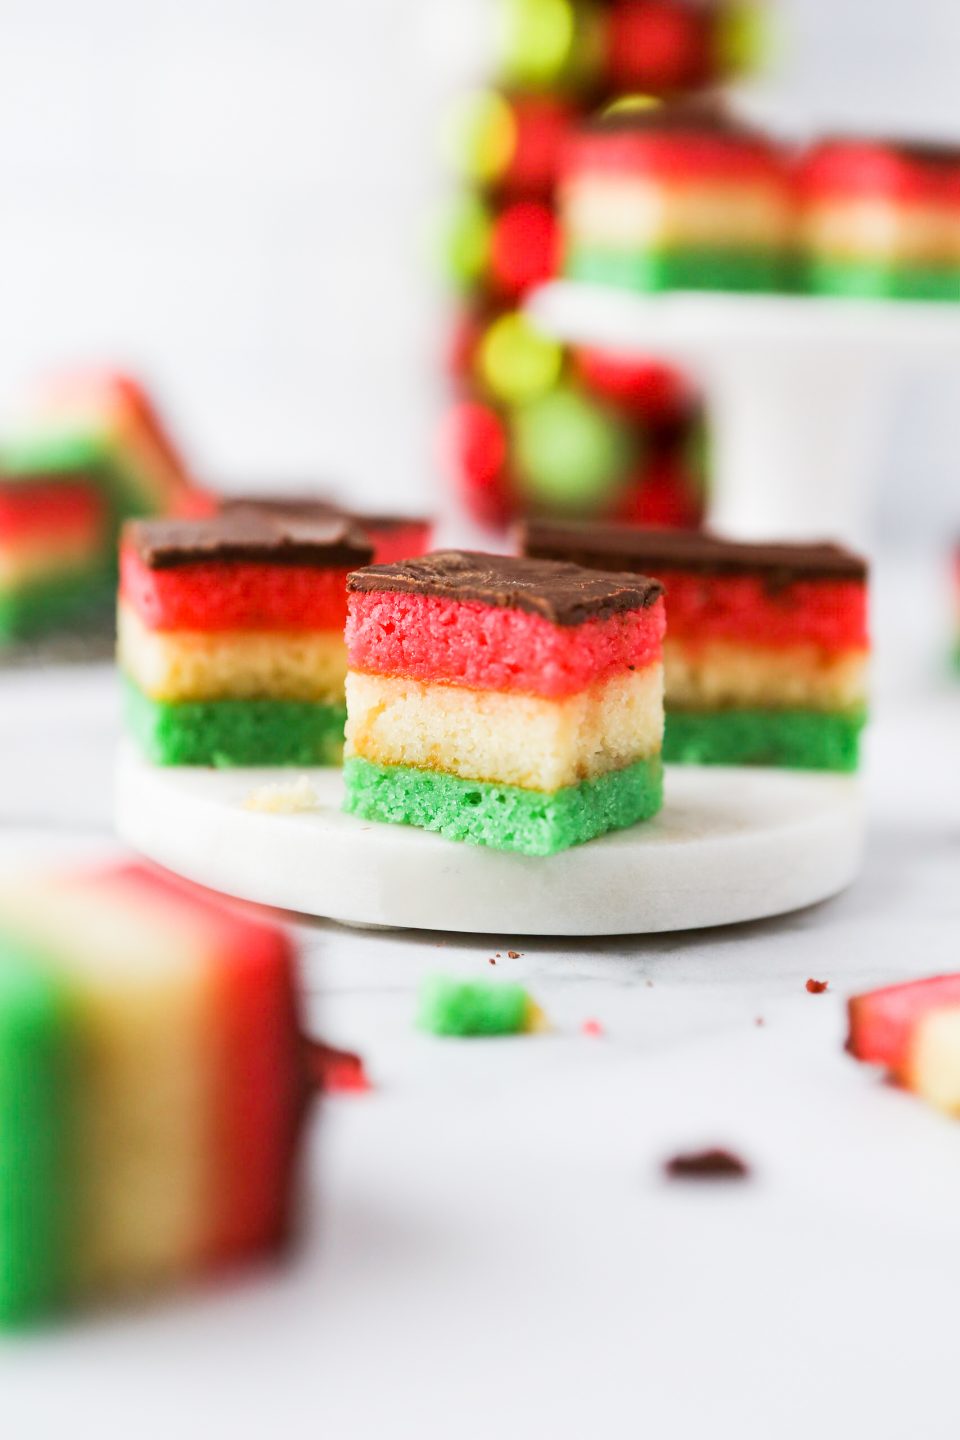 A photo showing gluten-free Venetian cookies which is 3 layers of almond cake with apricot jam between each layer and then coated in semi-sweet chocolate. They are cut into small pieces so you can see the layered colors of red, white, and green. 